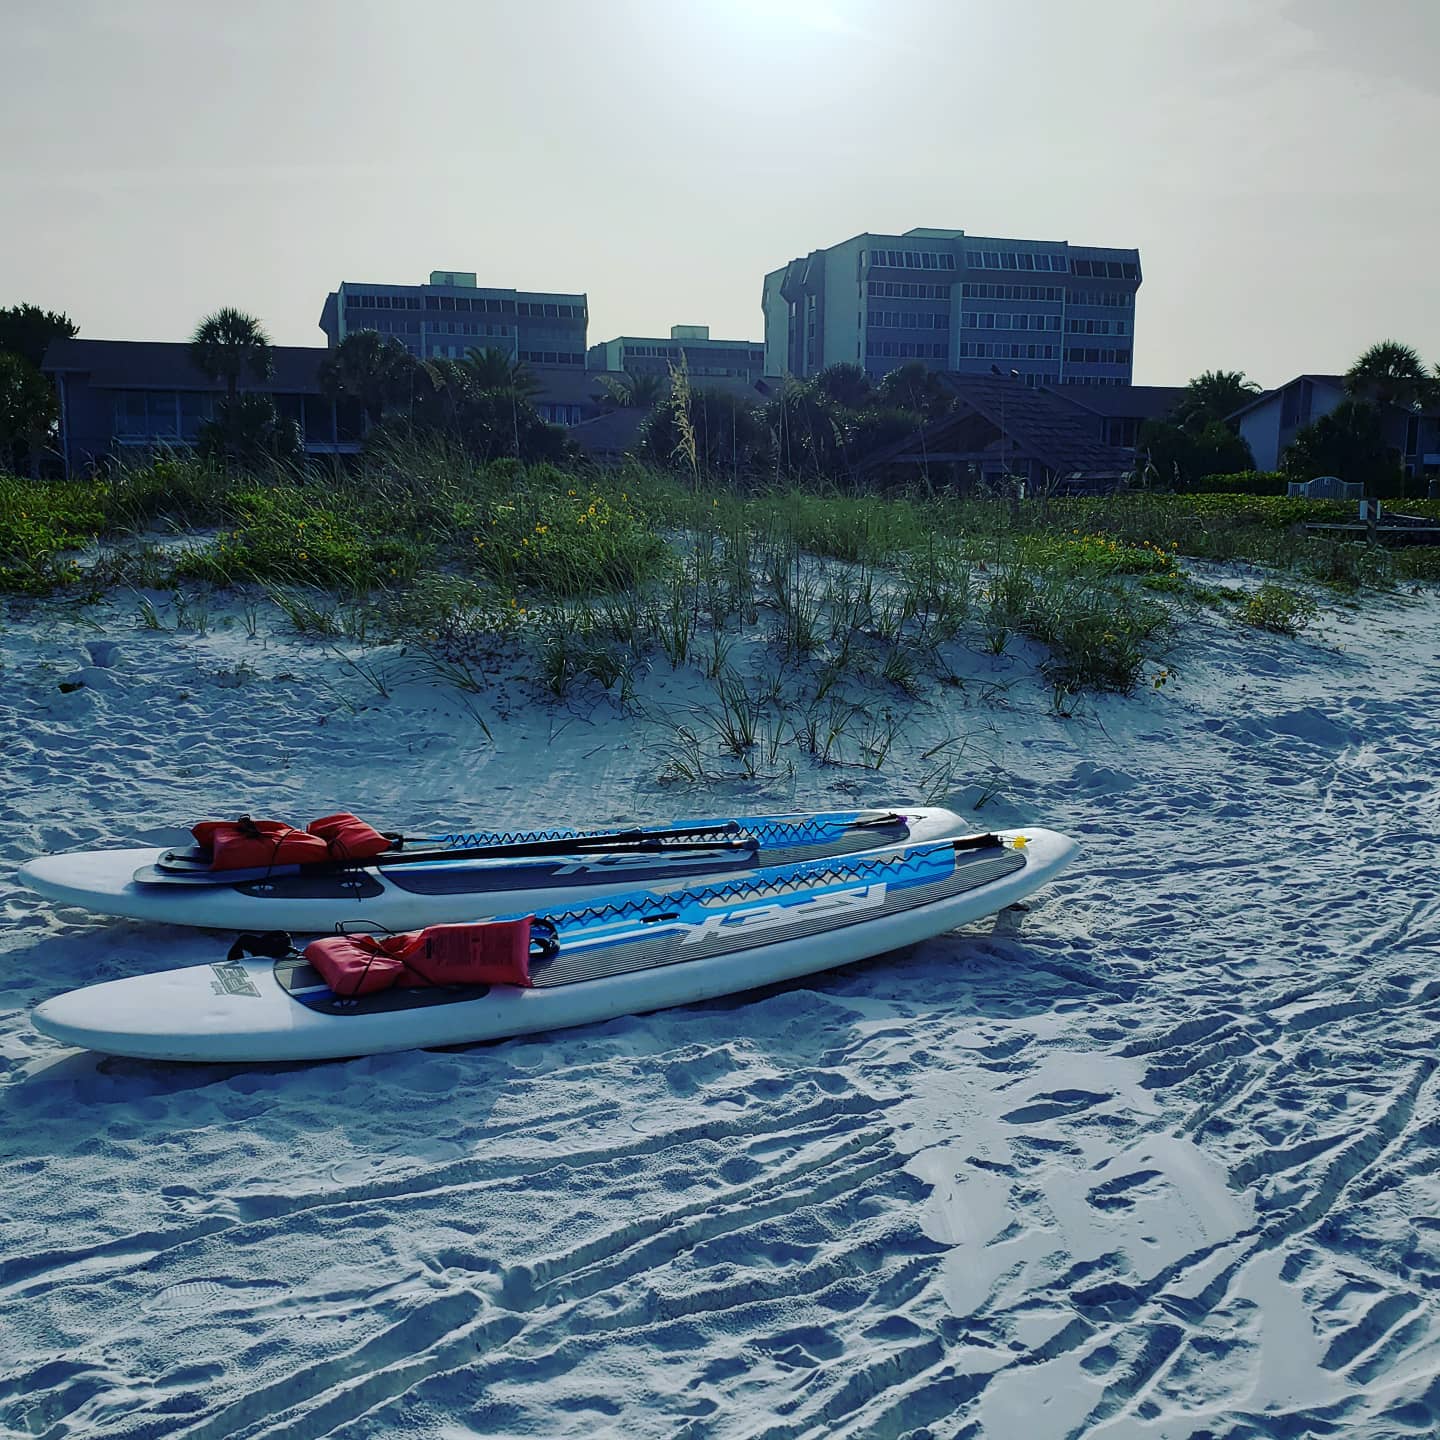 A beautiful HOT morning for a paddle at #siestakeypaddleboards #siestakey #siesta